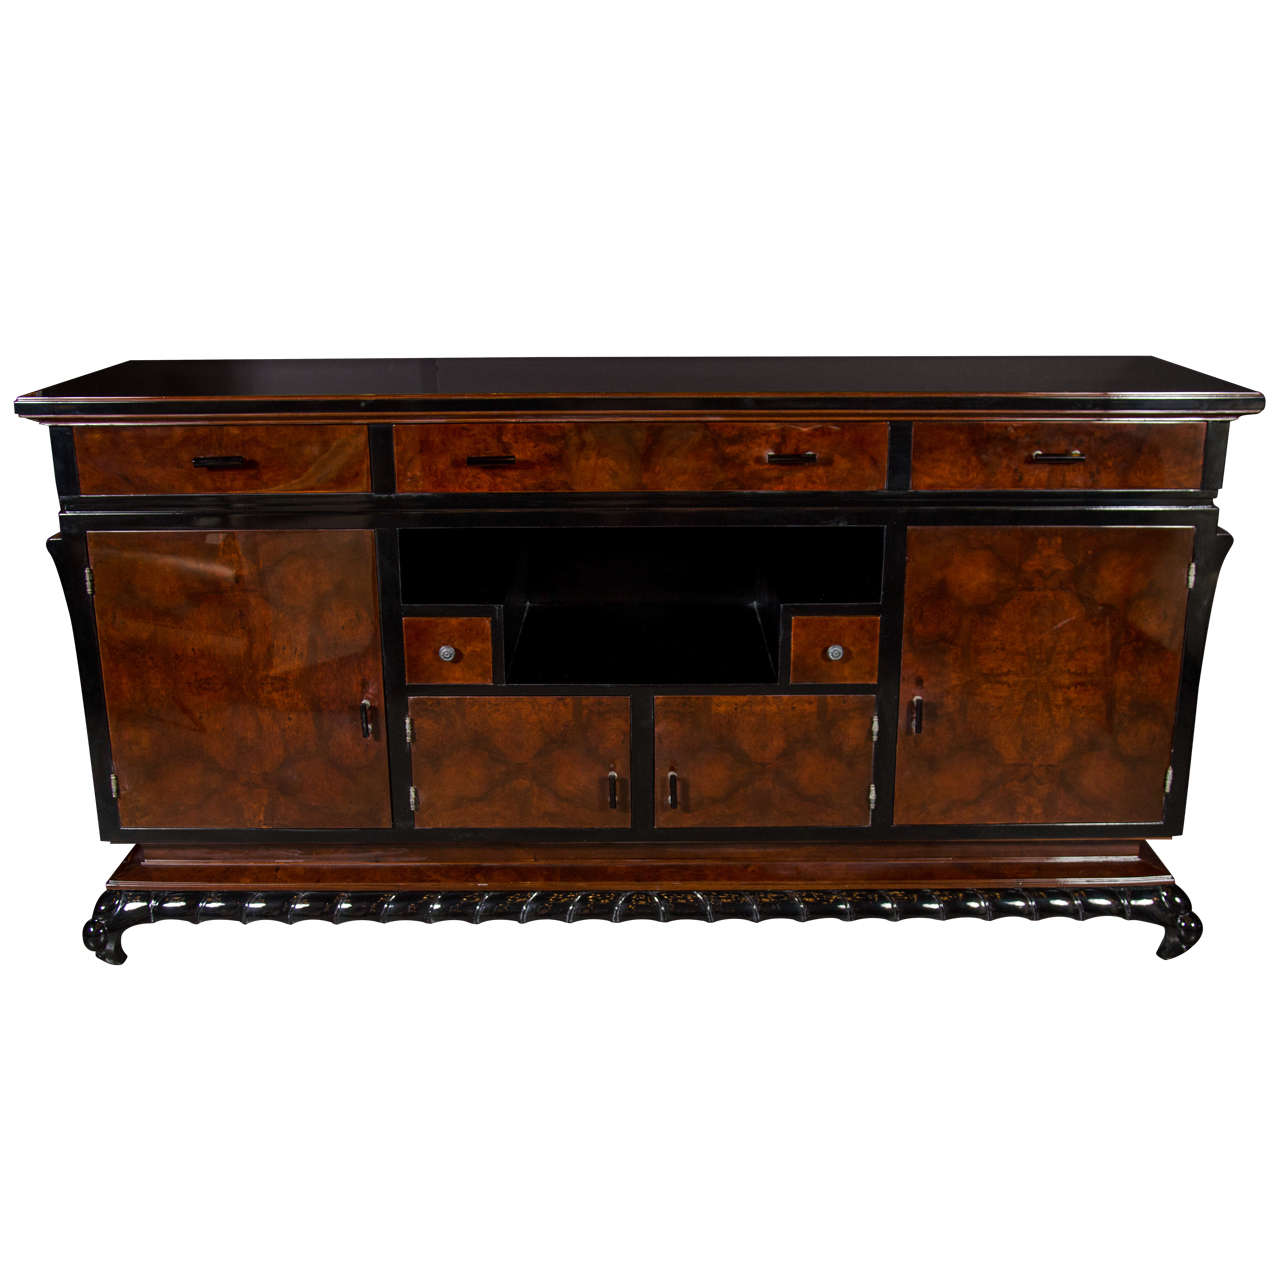 Exceptional Art Deco Sideboard in Bookmatched Burl Walnut and Central Niche